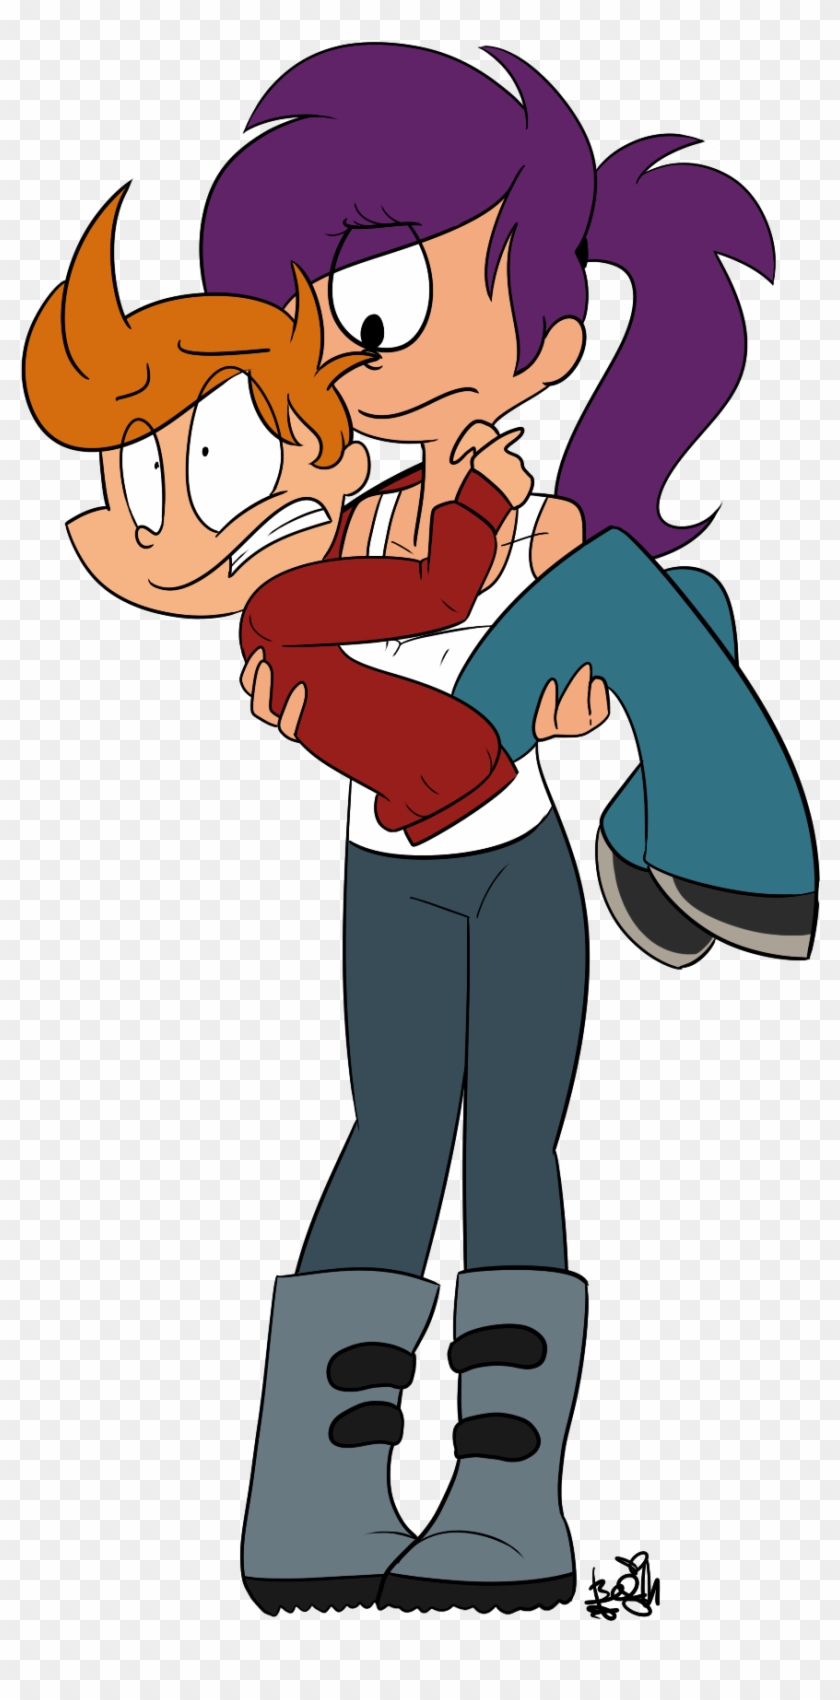 Fry And Leela By Befishproductions Fry And Leela By - Fry And Leela Deviantart #393838